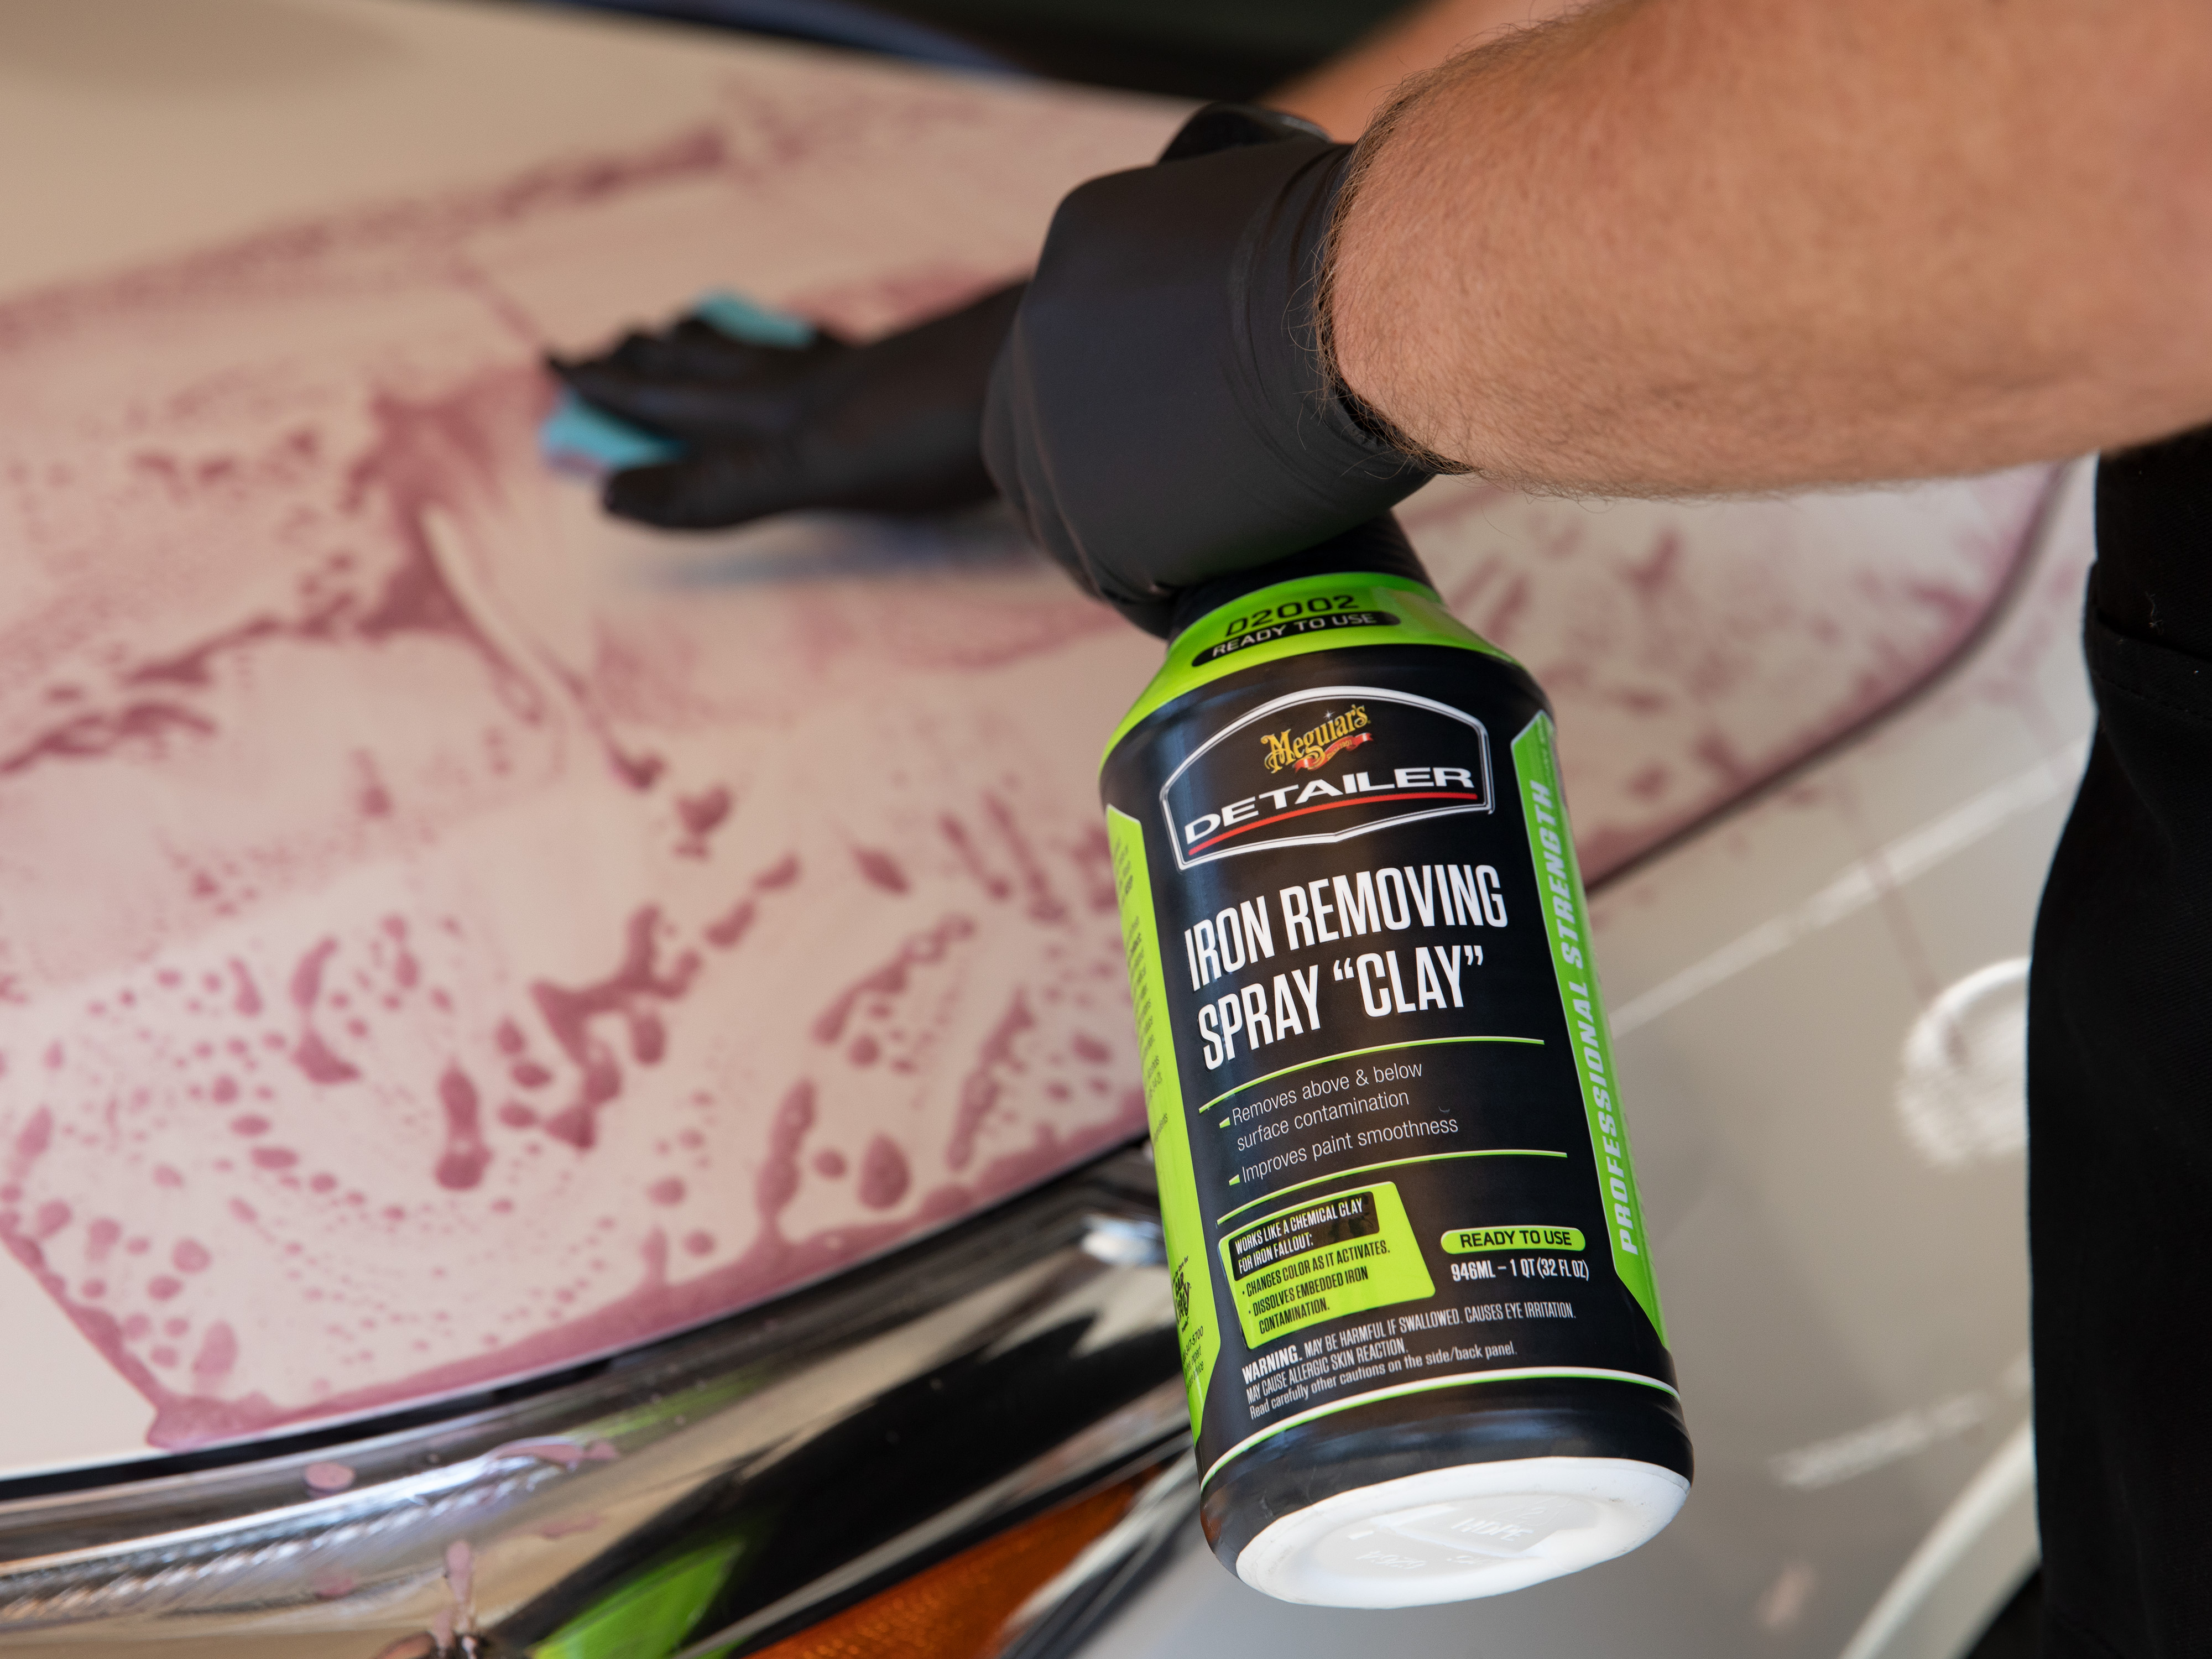 The Ultimate Iron Remover Product Guide: Contaminants Gone!